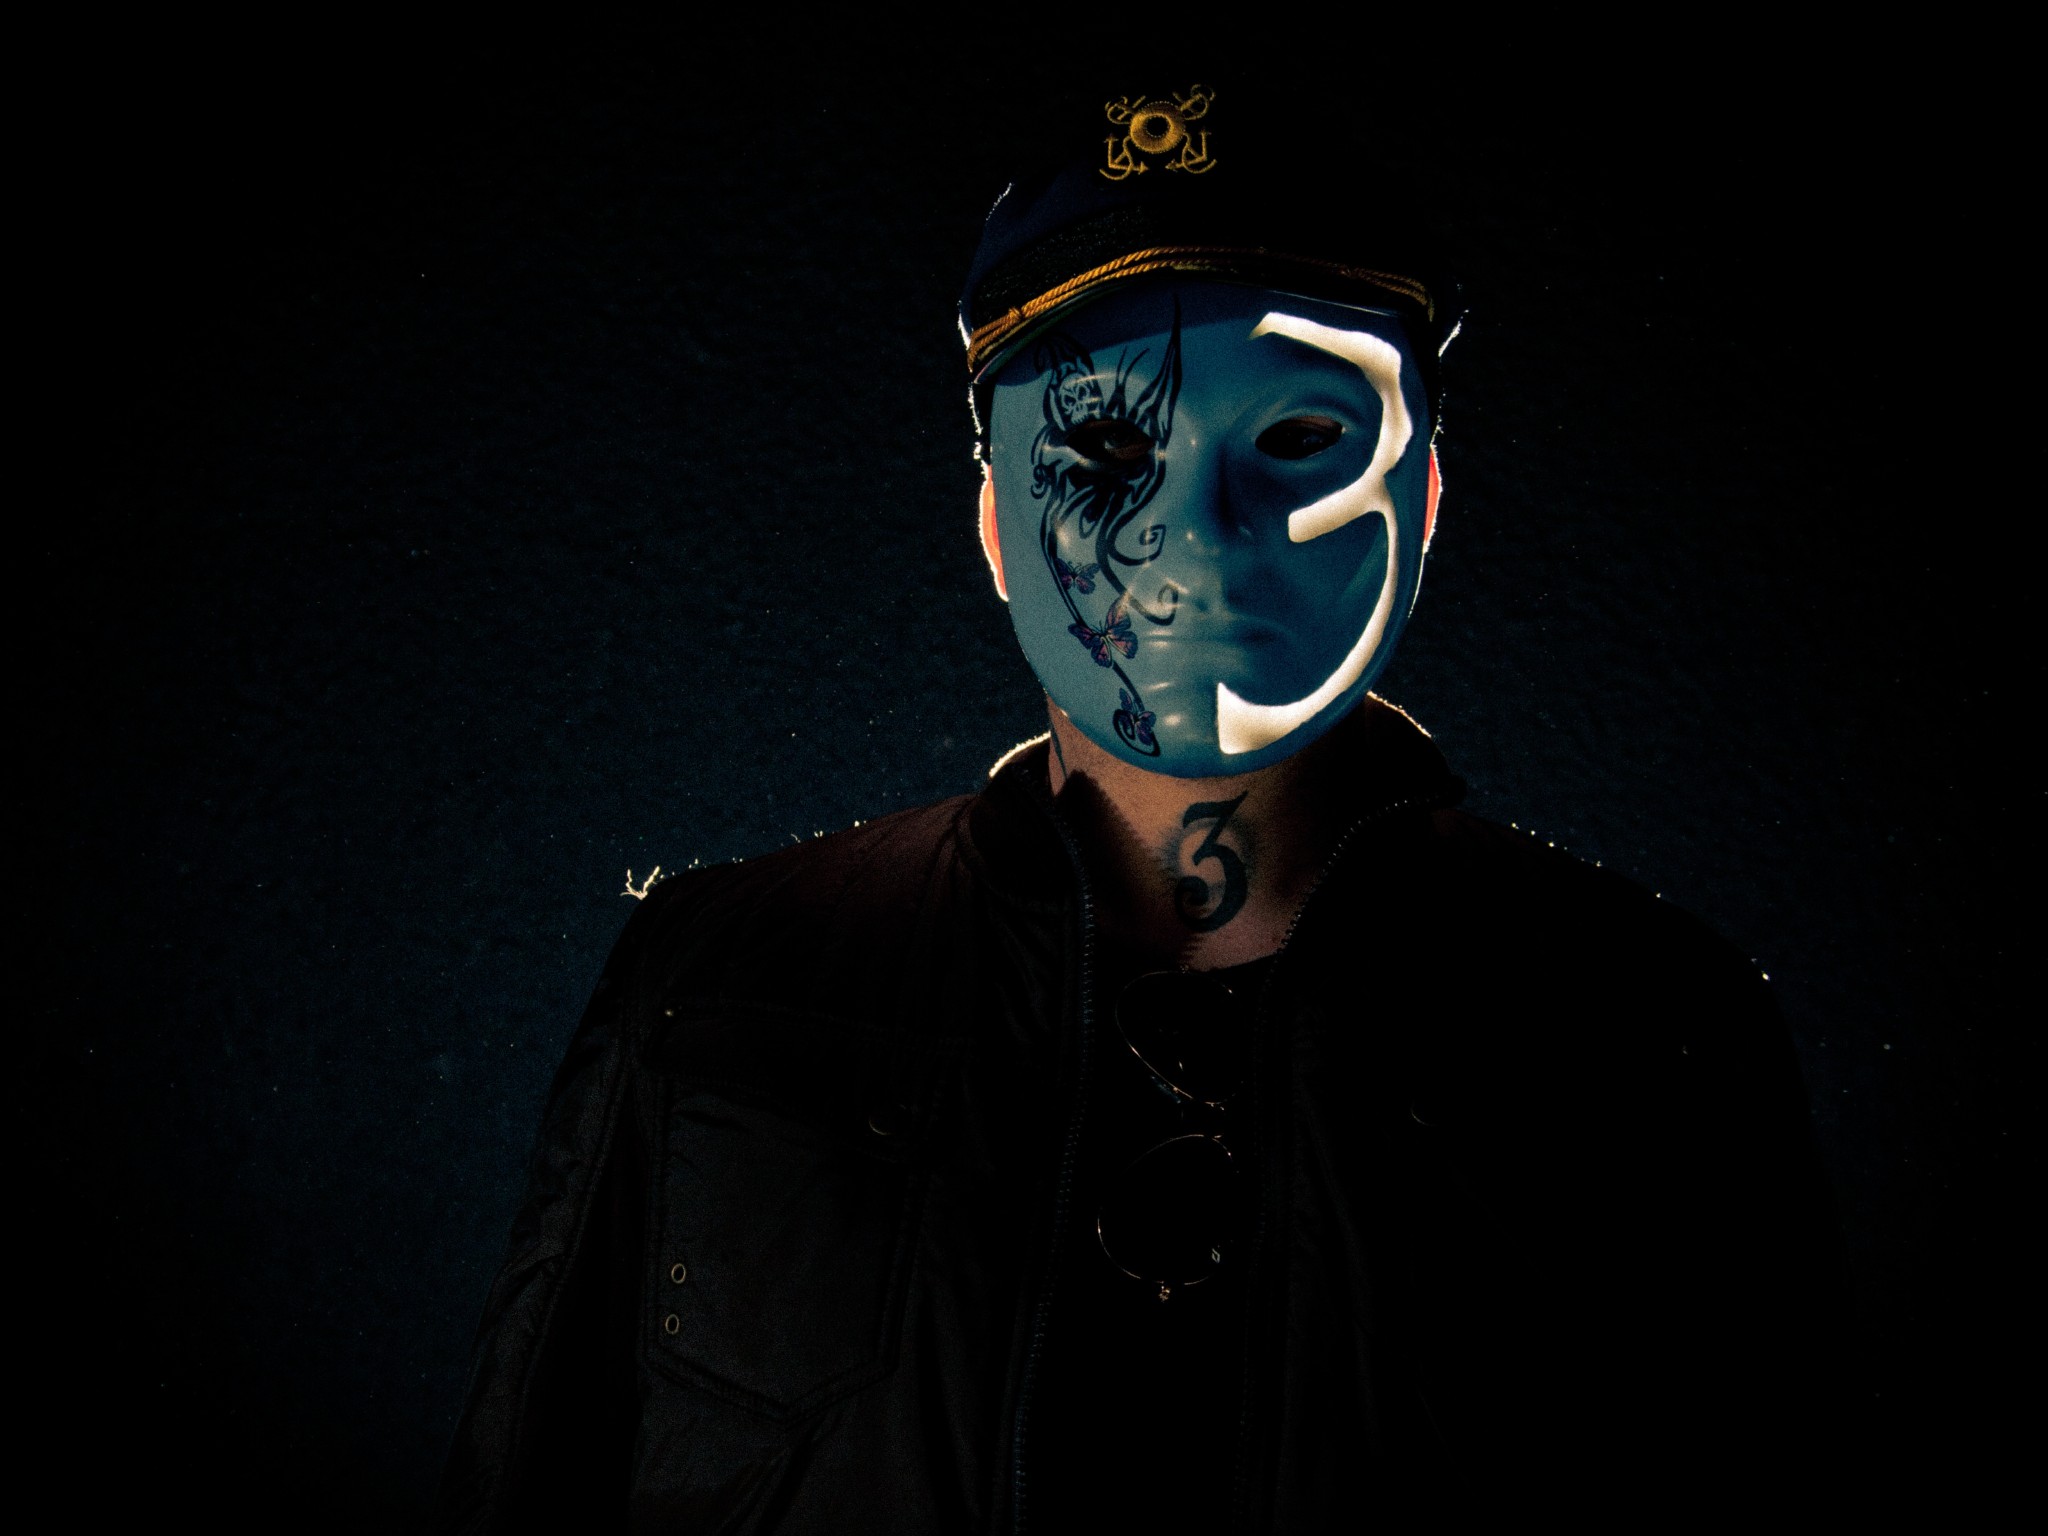 [47+] Hollywood Undead Wallpaper for iPhone on WallpaperSafari